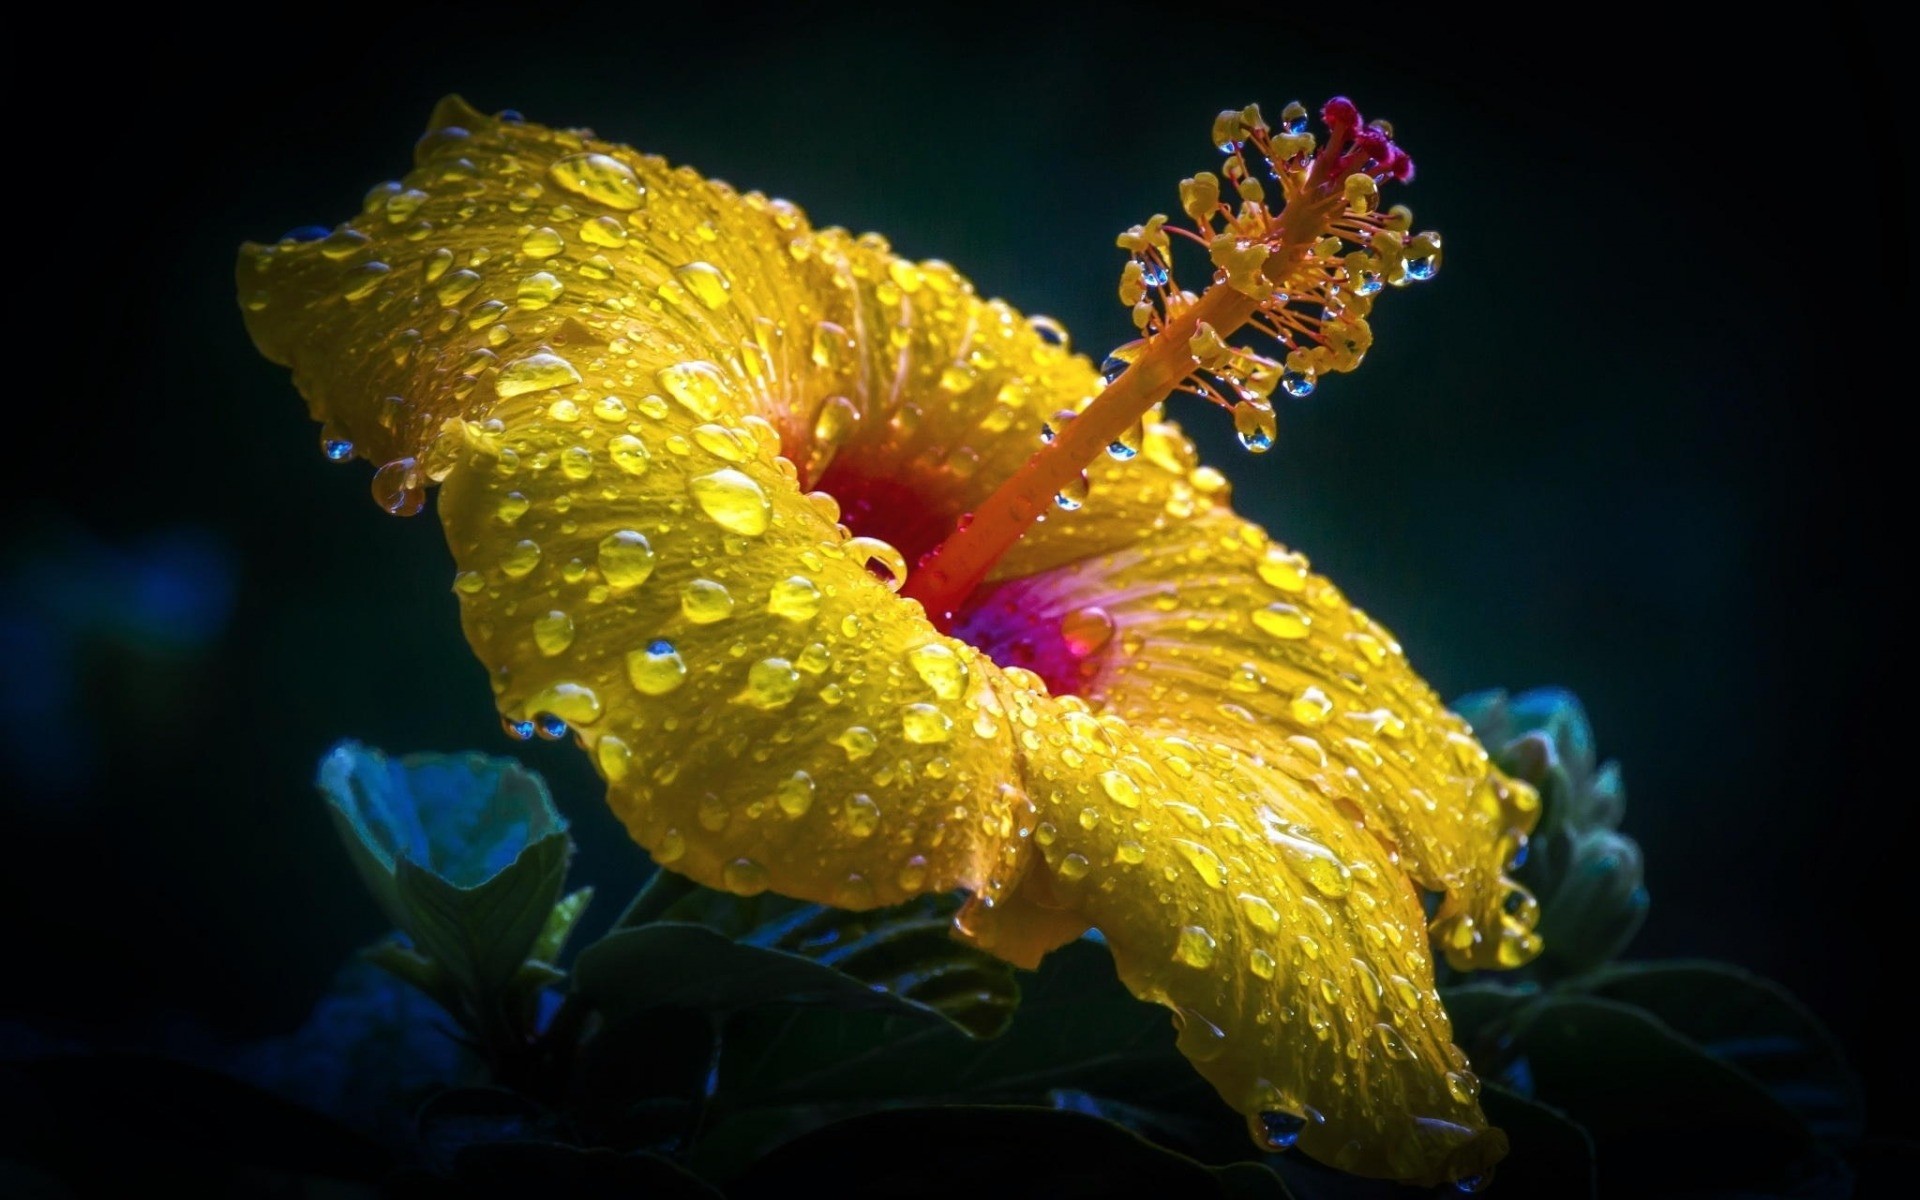 hibiscus, flowers, earth, close up, flower, water drop, yellow flower wallpaper for mobile